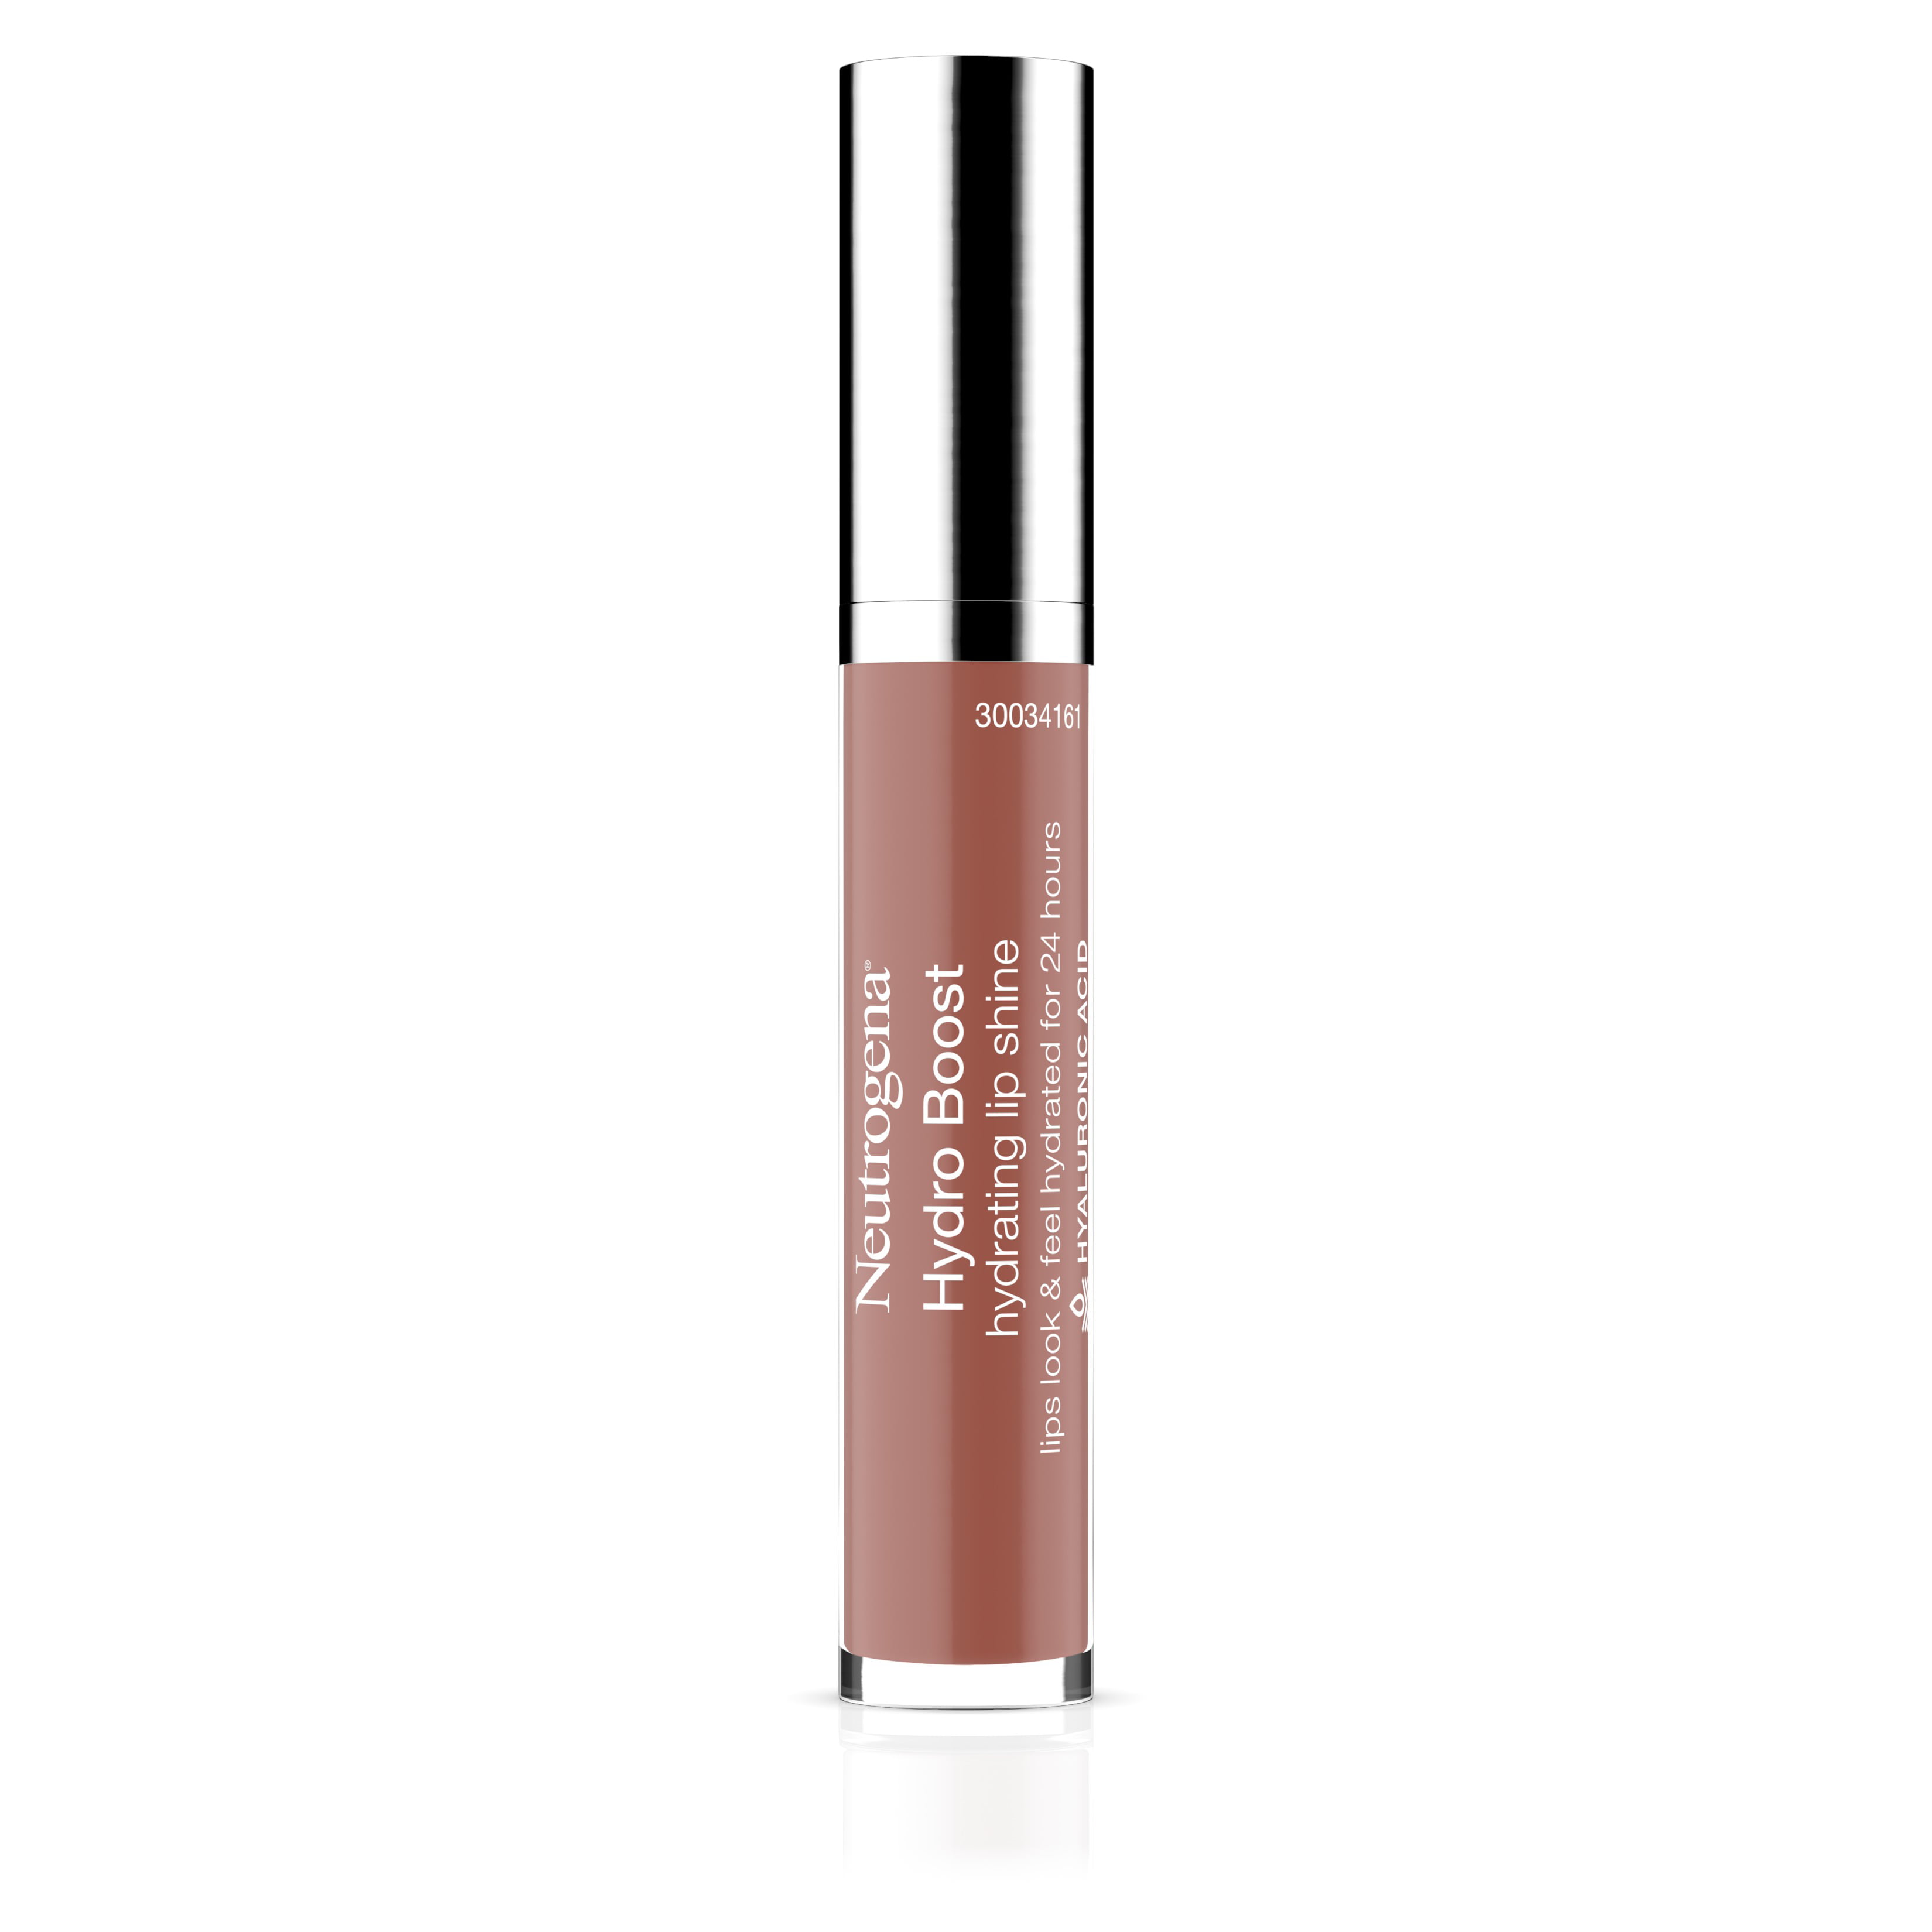 Neutrogena Hydro Boost Moisturizing Lip Gloss with Hyaluronic Acid to Soften & Condition Lips, Hydrating & Non-Stick - 27 Almond Nude